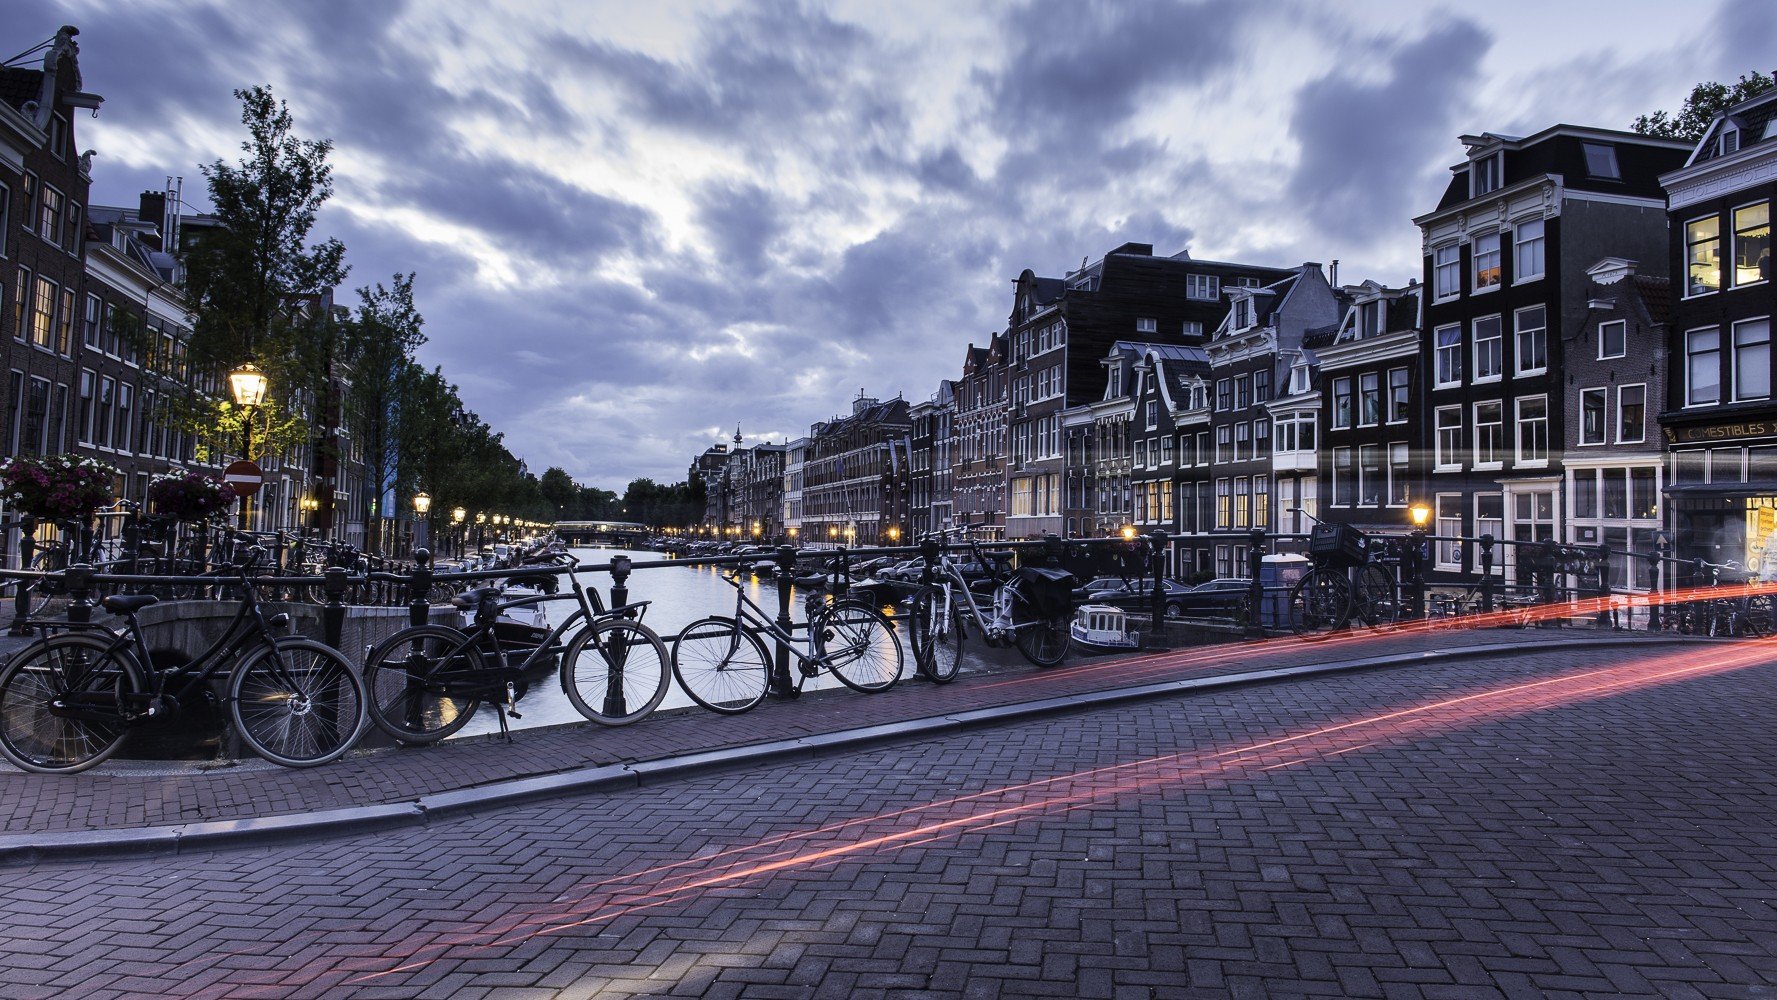 amsterdam photo wallpaper  Amsterdam Backgrounds Free Download  Wallpapers  Backgrounds Images   Amsterdam travel Travel photos Amsterdam photos